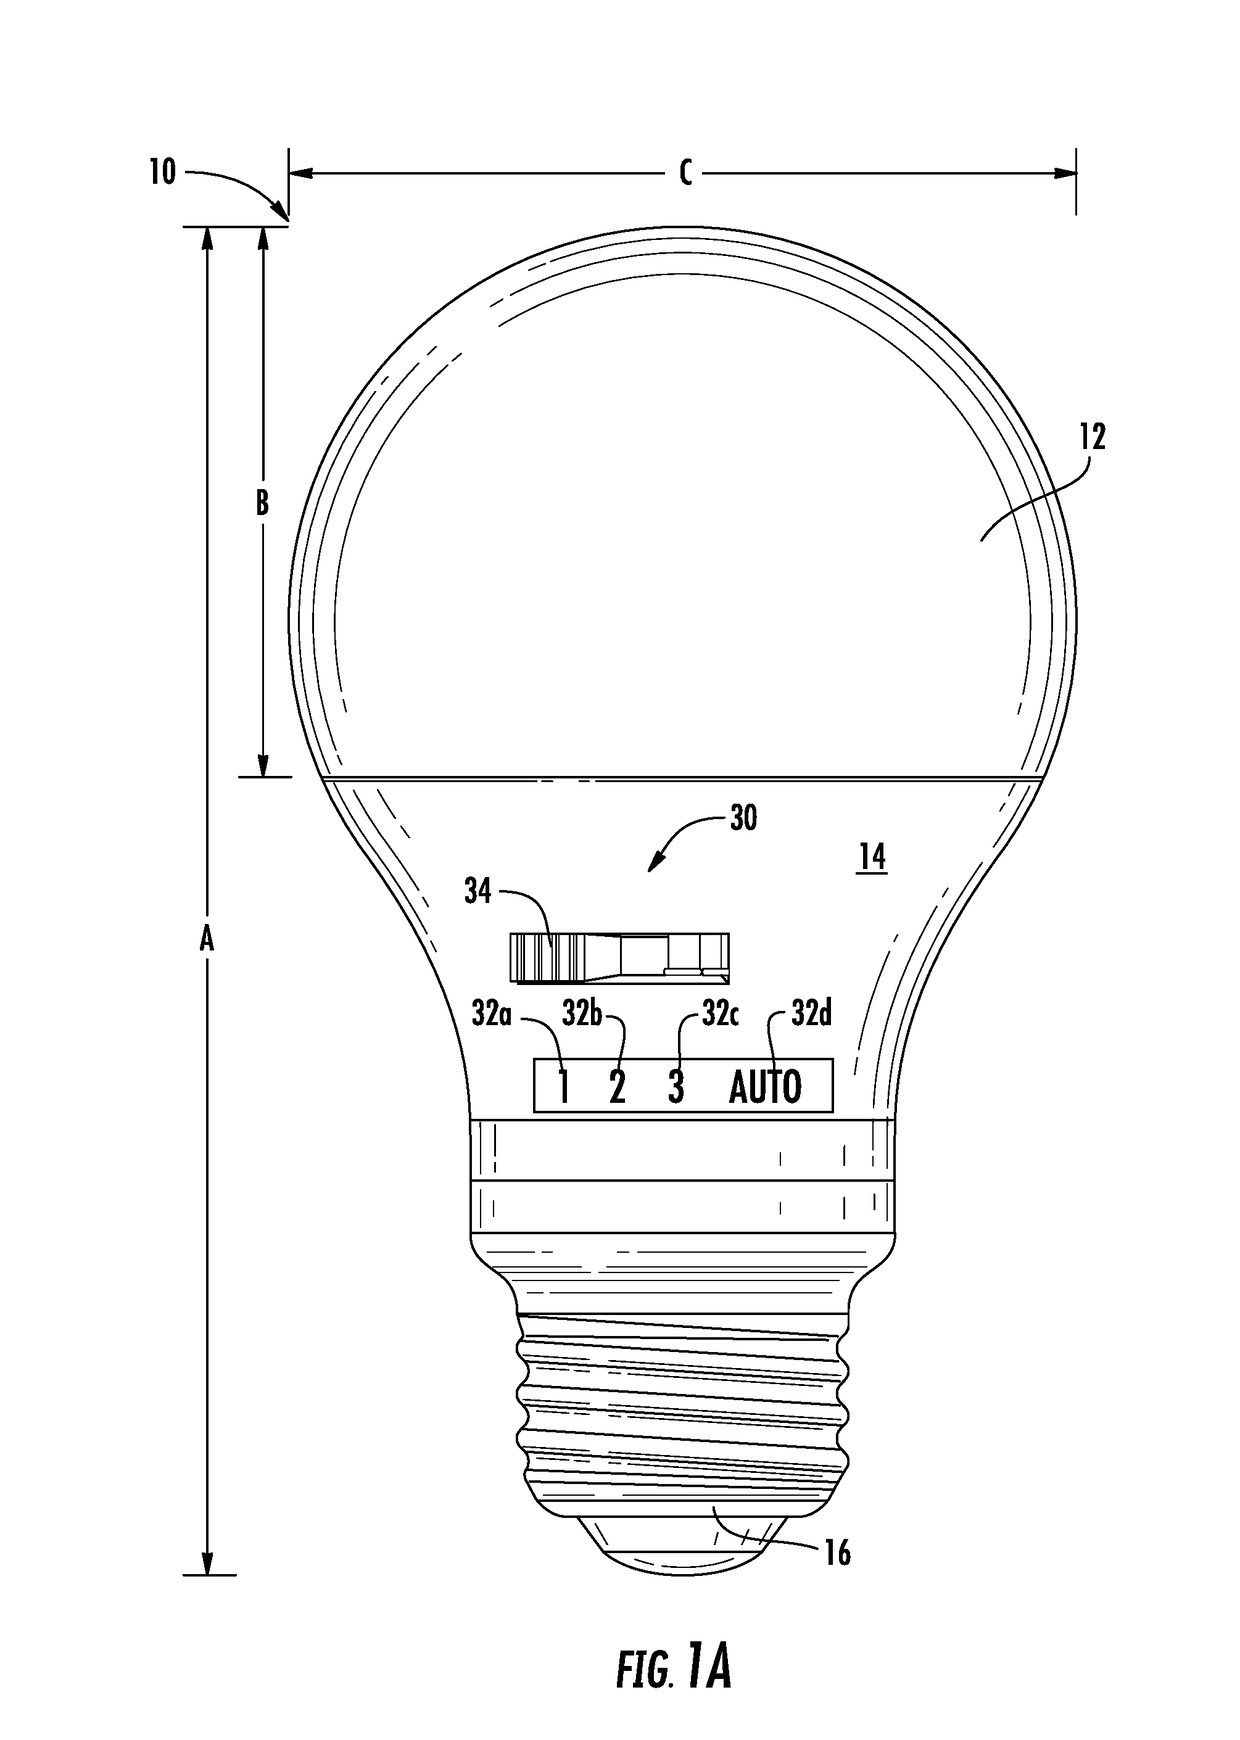 Light emitting diode (LED) lighting device or lamp with configurable light qualities